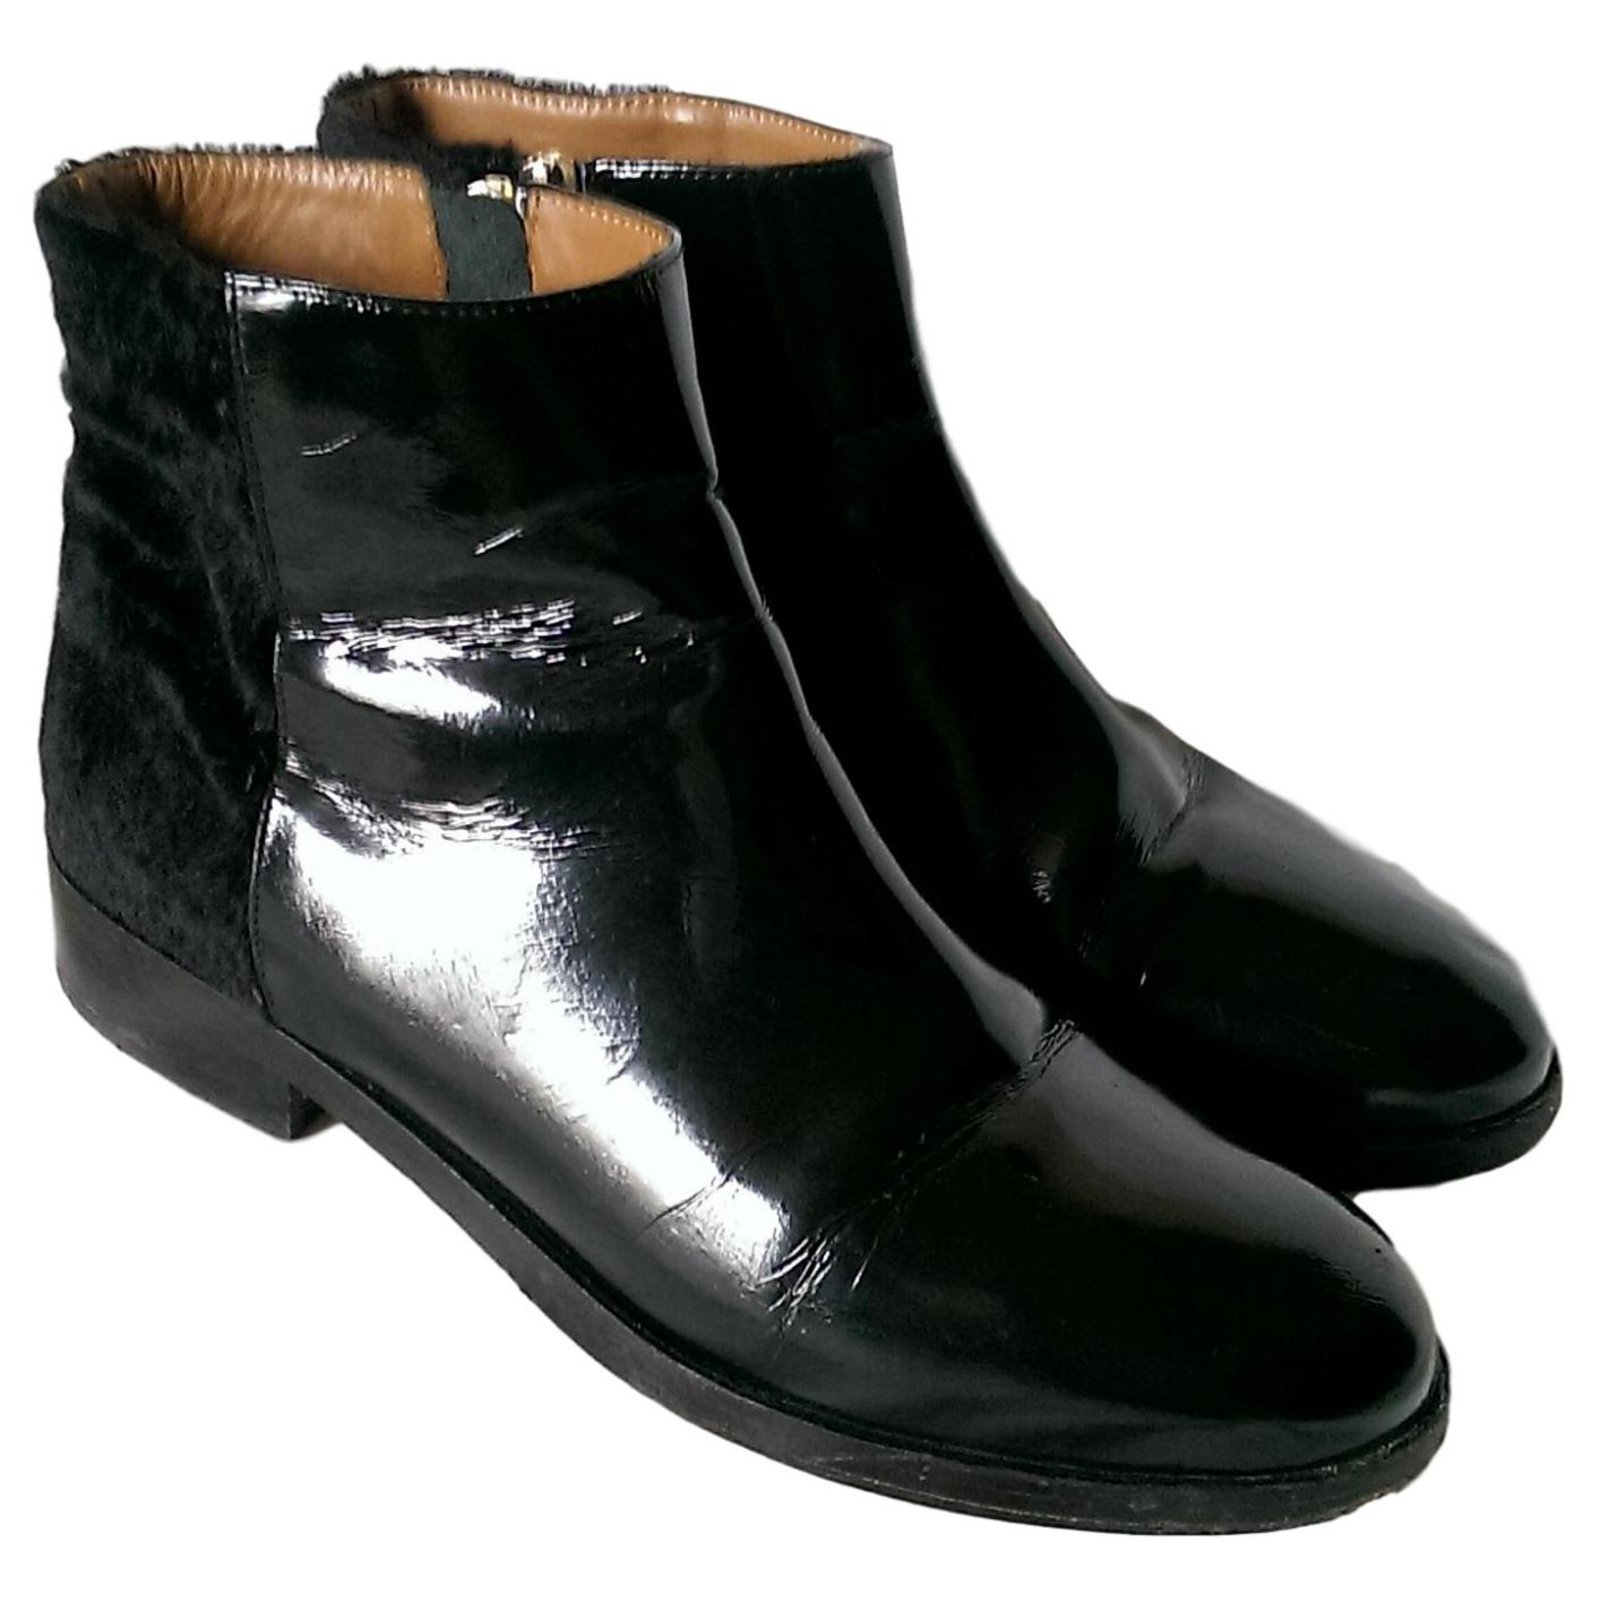 patent leather flat boots